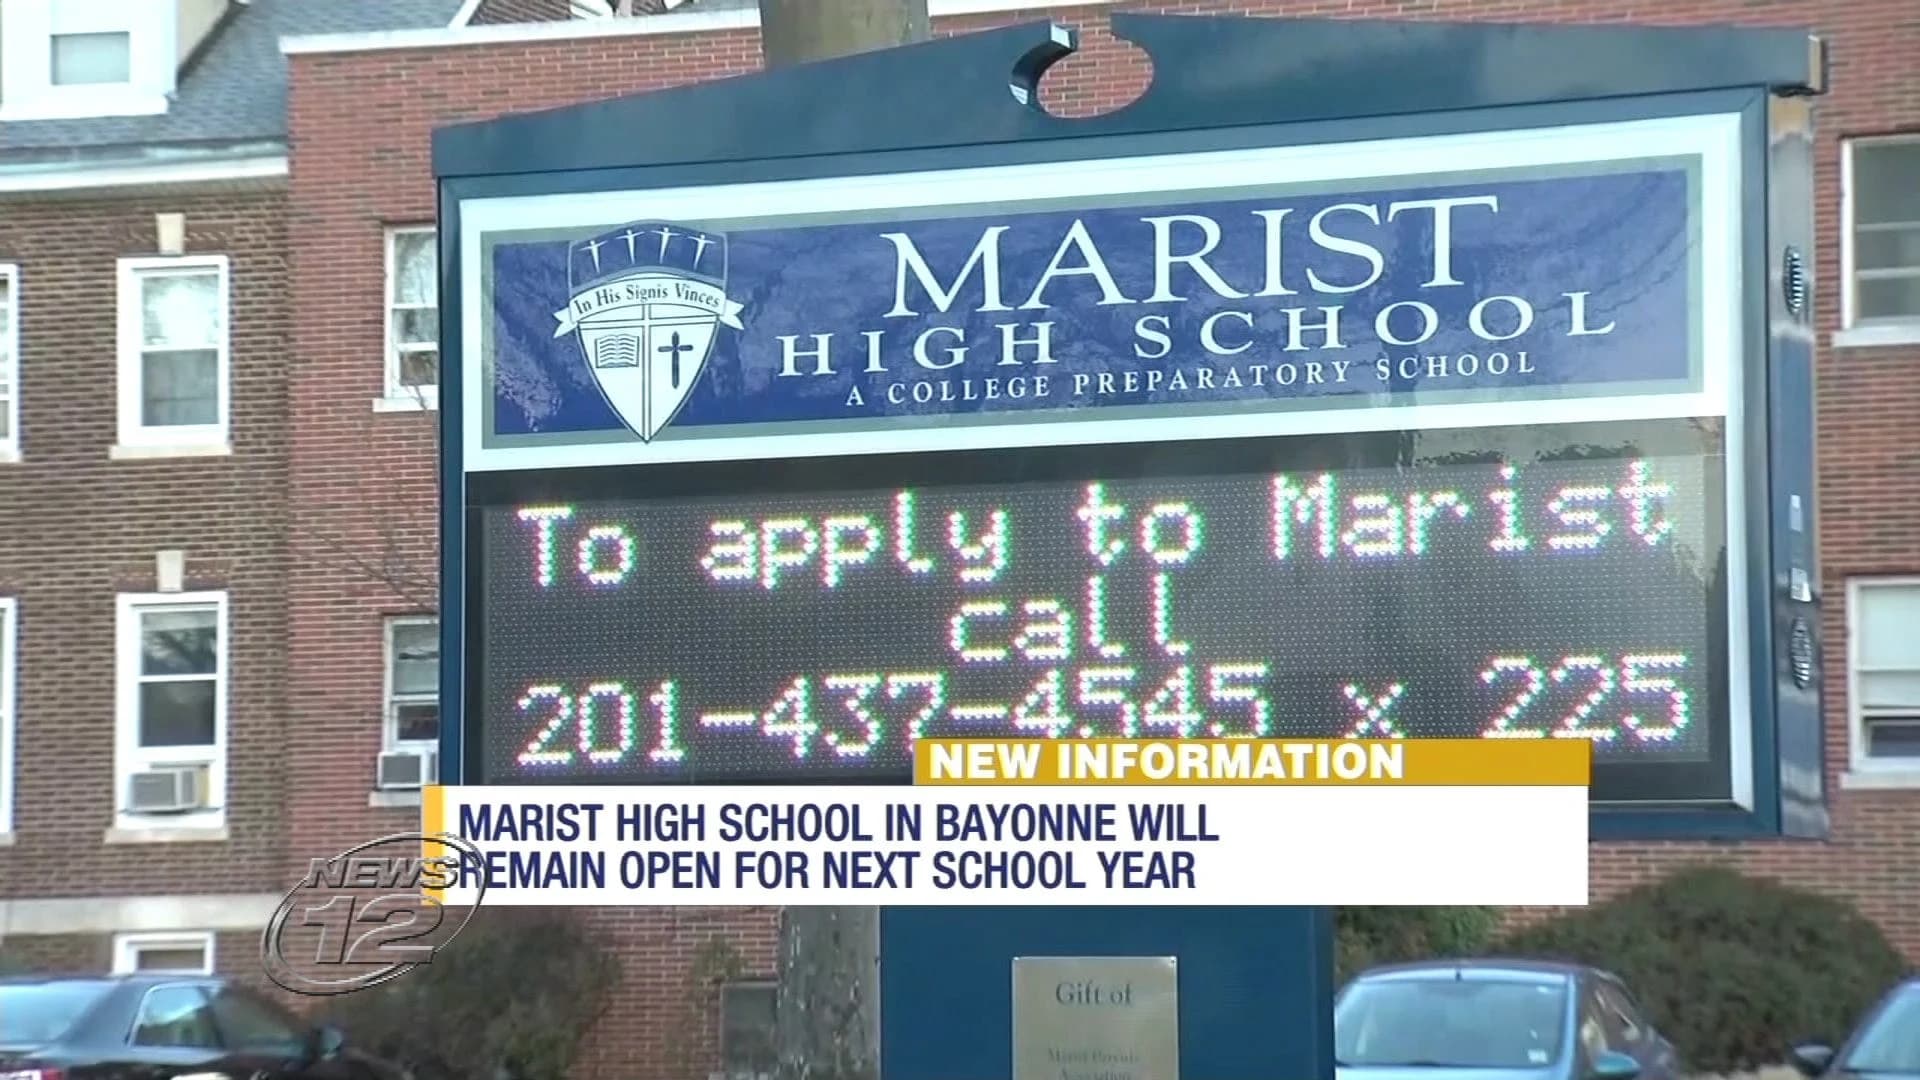 Fundraising efforts help save Marist High School from closure